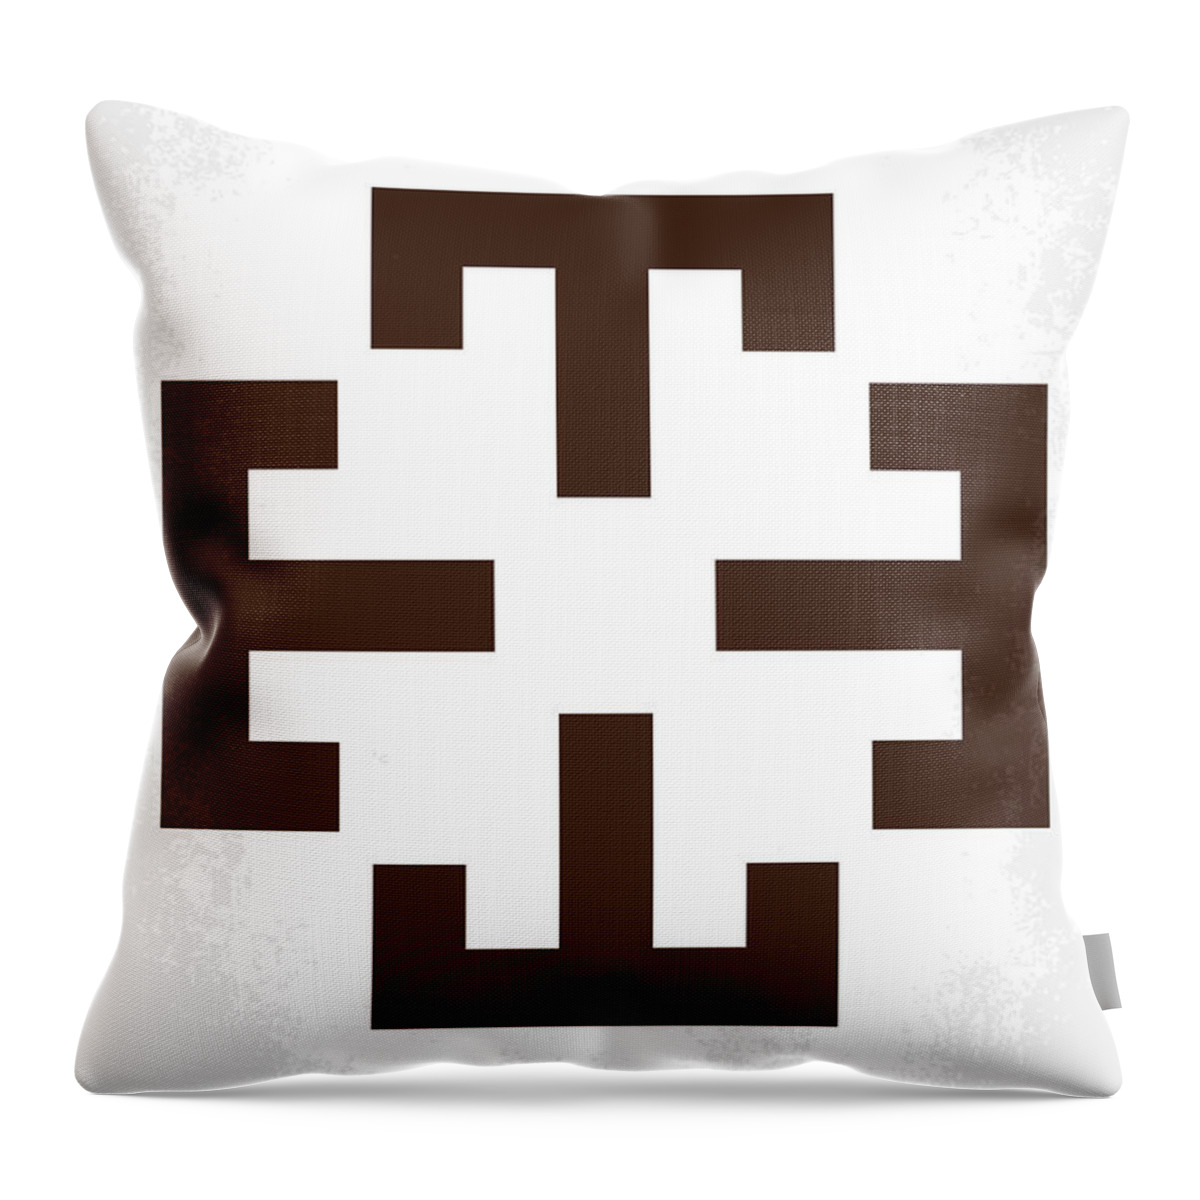 Equilibrium Throw Pillow featuring the digital art No595 My Equilibrium minimal movie poster by Chungkong Art